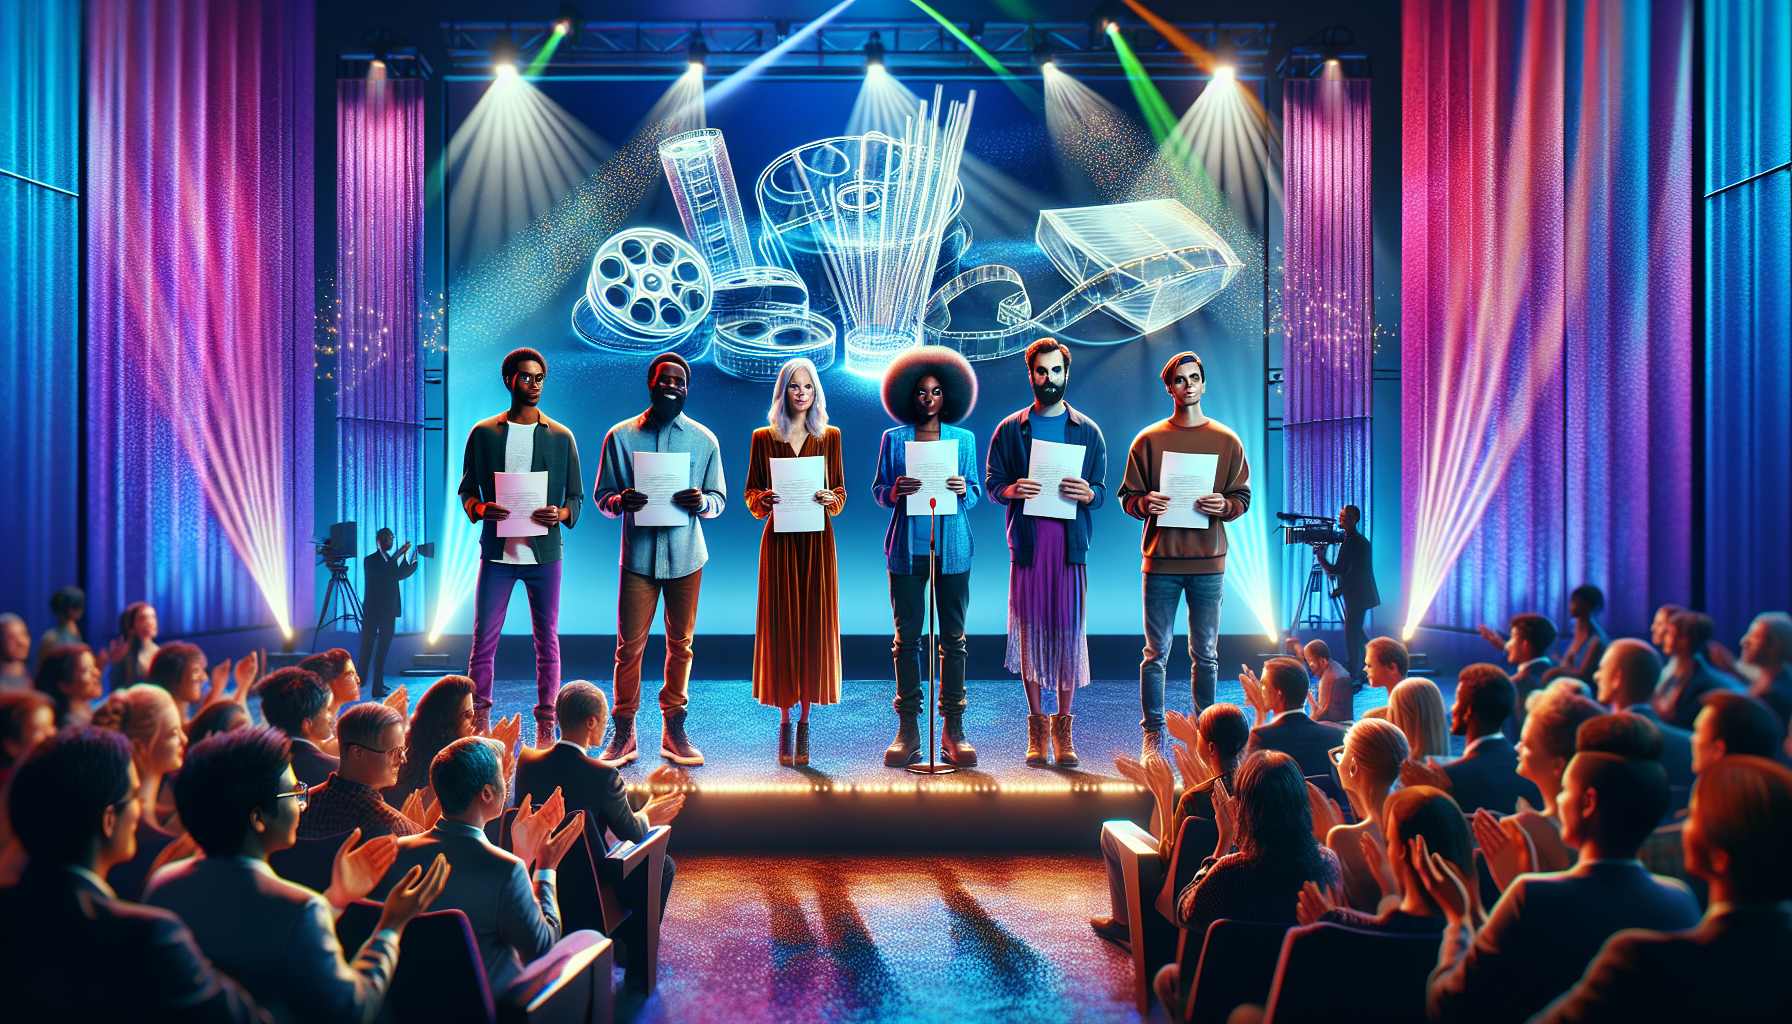 A vibrant and artistic award ceremony scene with five diverse screenwriters, each holding a unique, creatively-designed script, standing on a modern, elegantly-lit stage with a large digital screen in